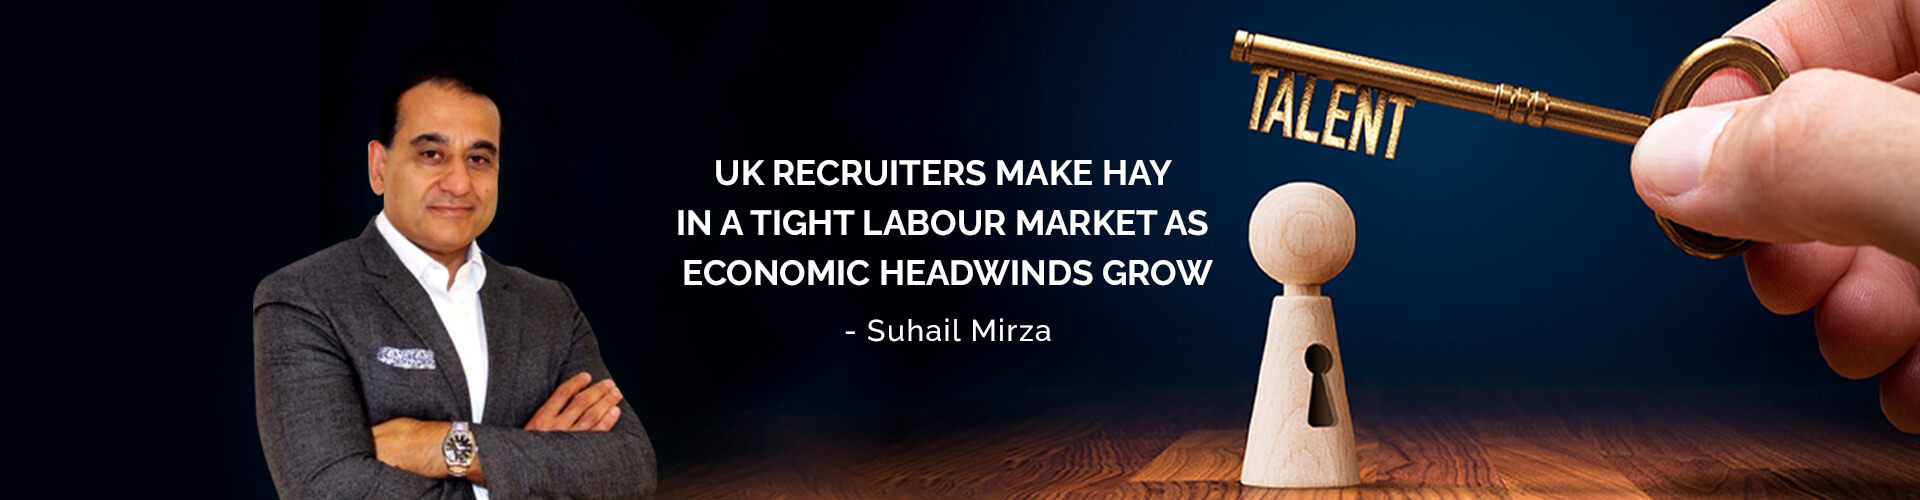 UK RECRUITERS MAKE HAY IN A TIGHT LABOUR MARKET AS ECONOMIC HEADWINDS GROW